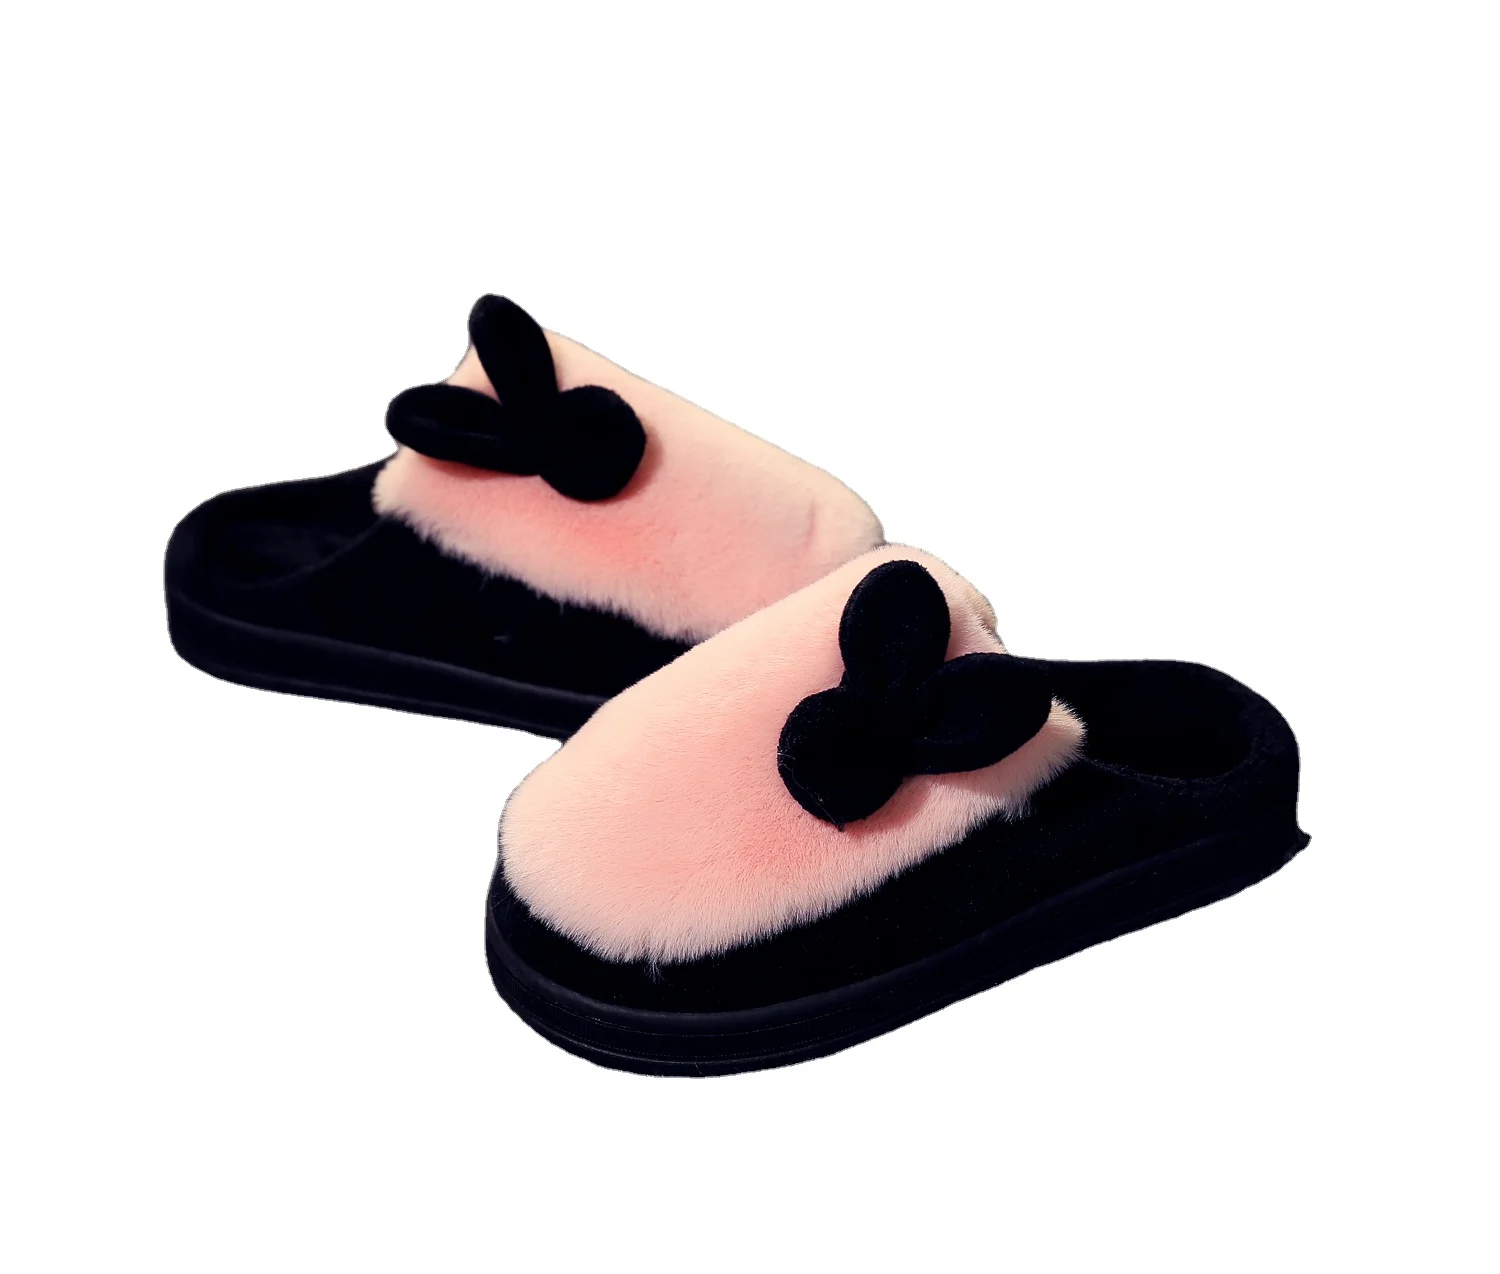 

Womens Comfy Thick Soft Fluffy Slippers Warm China Non-Skid Indoor Slides Outdoor Ladies Filp Flop Slippers, Solid color